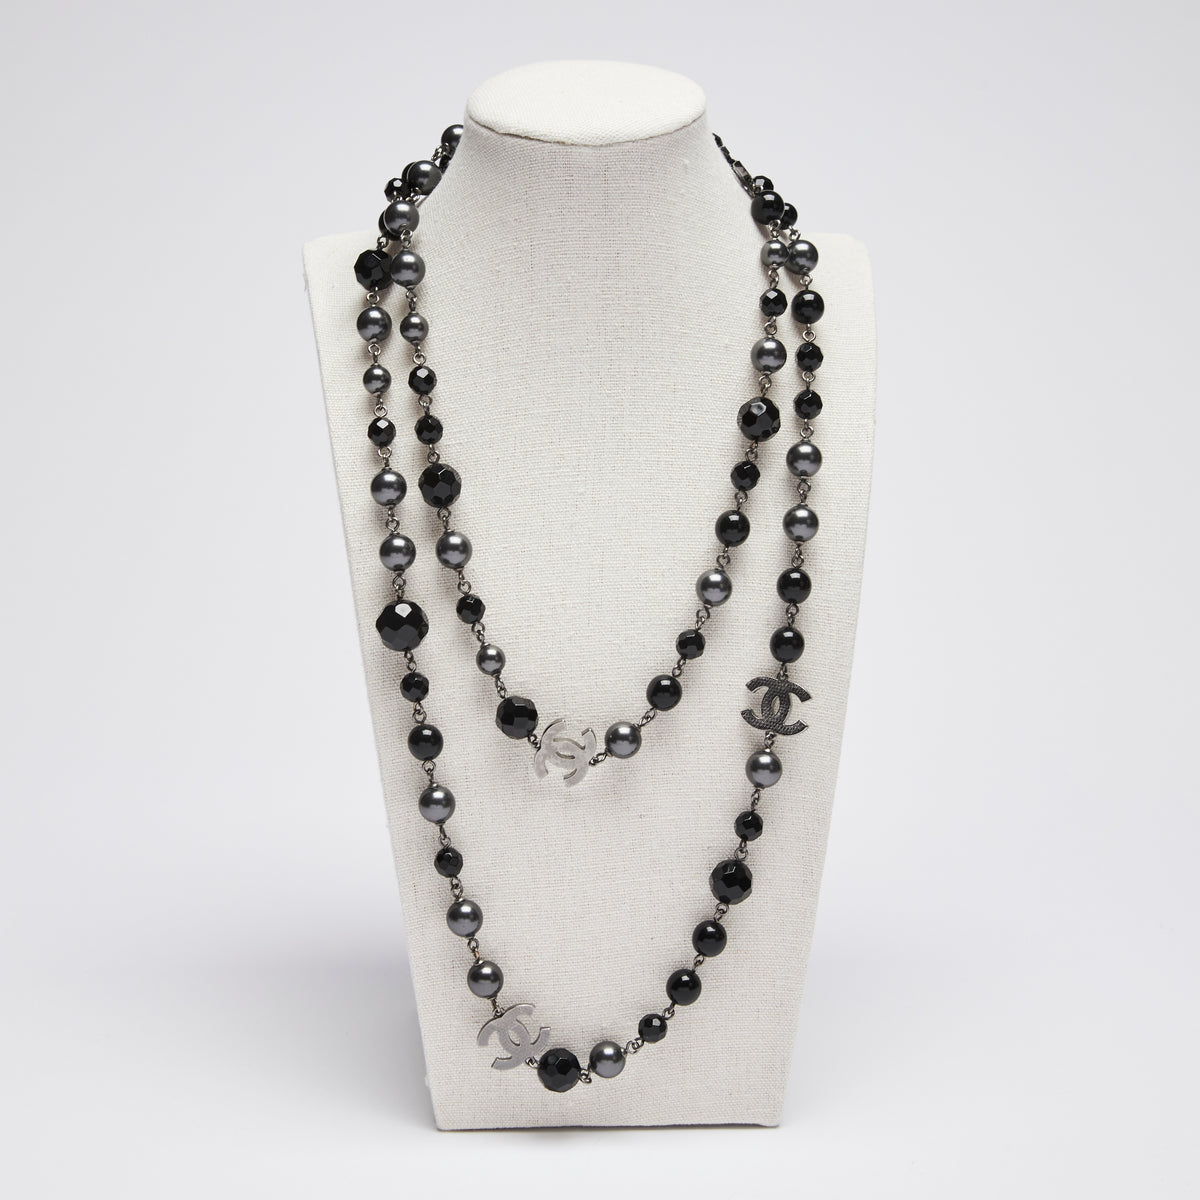 Chanel Black Bead and Pearl Dark Silver Long Necklace